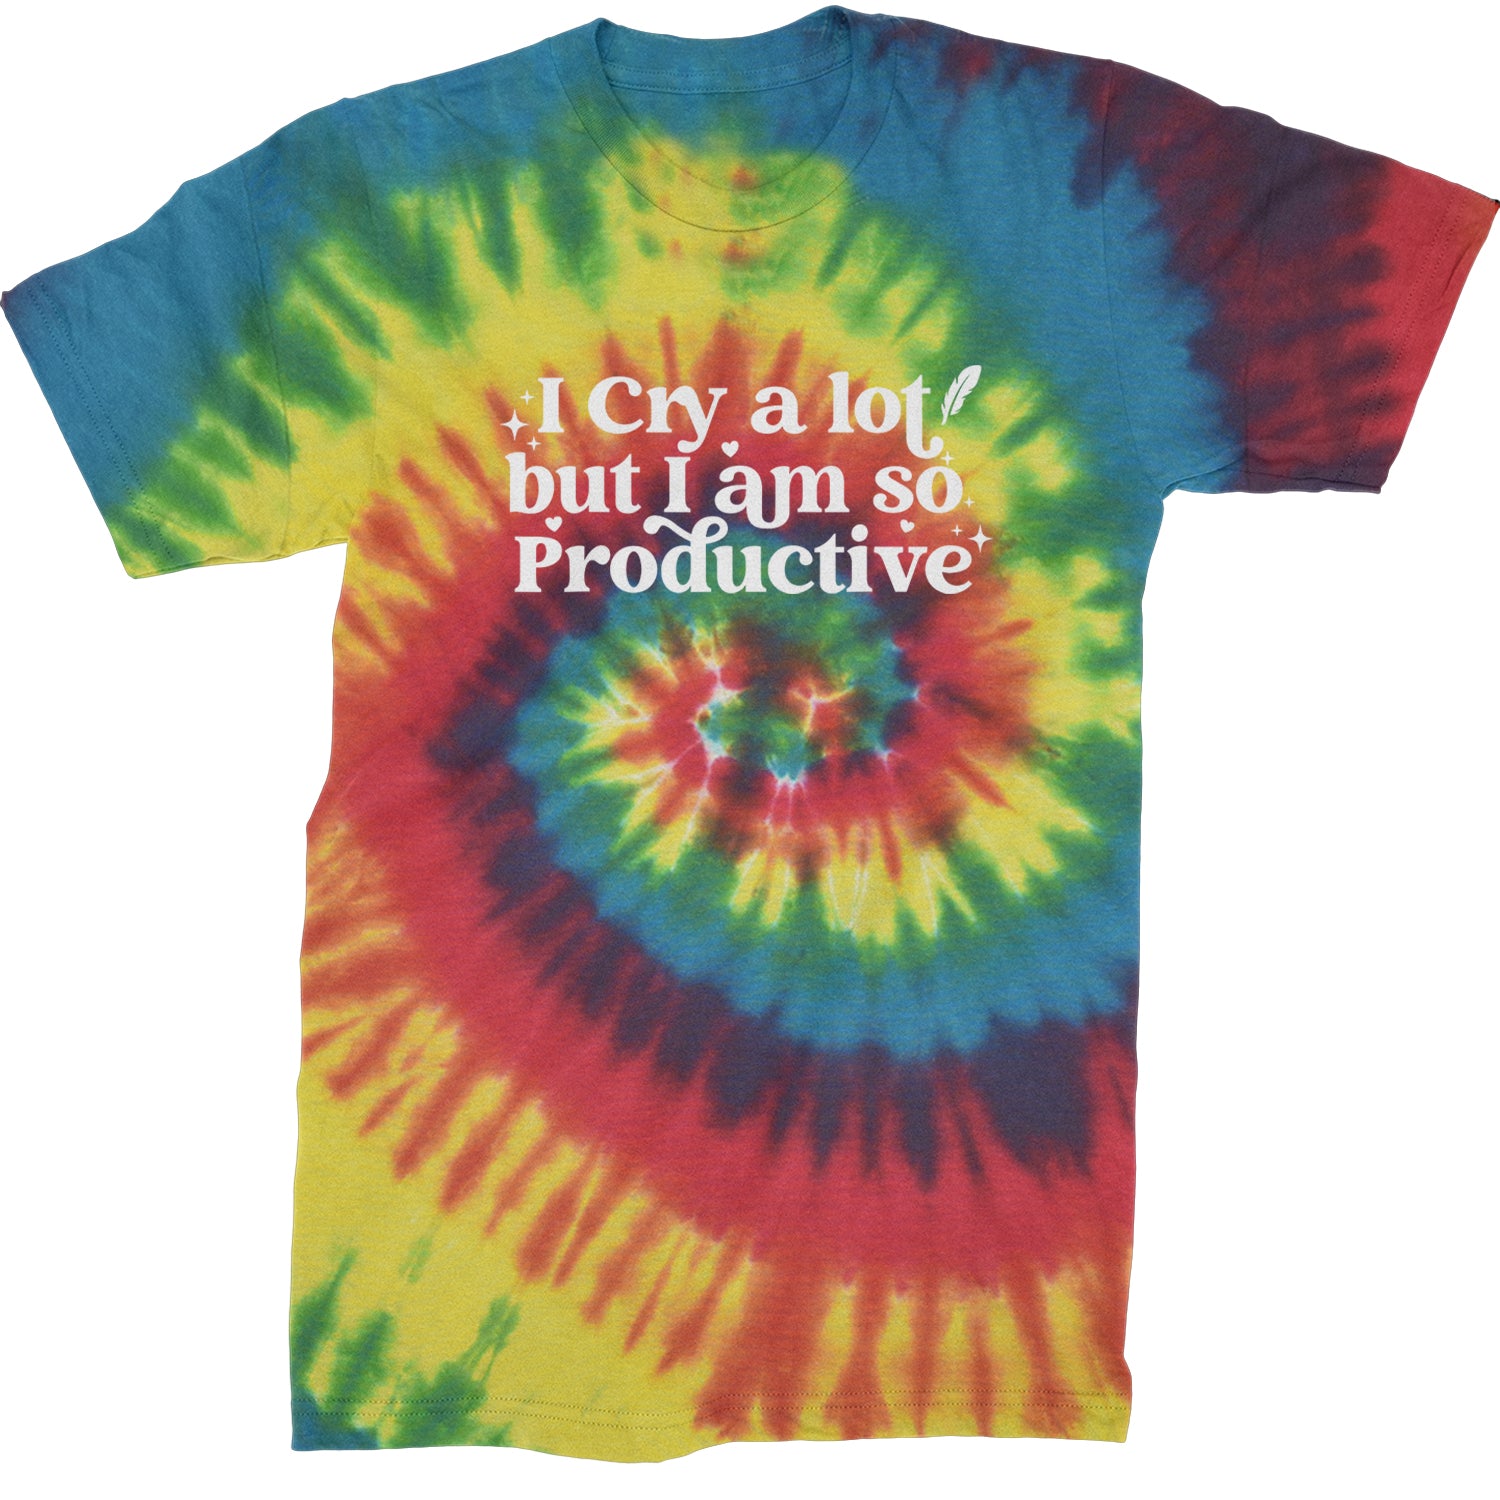 I Cry A Lot But I am So Productive TTPD Mens T-shirt Tie-Dye Rainbow Reactive